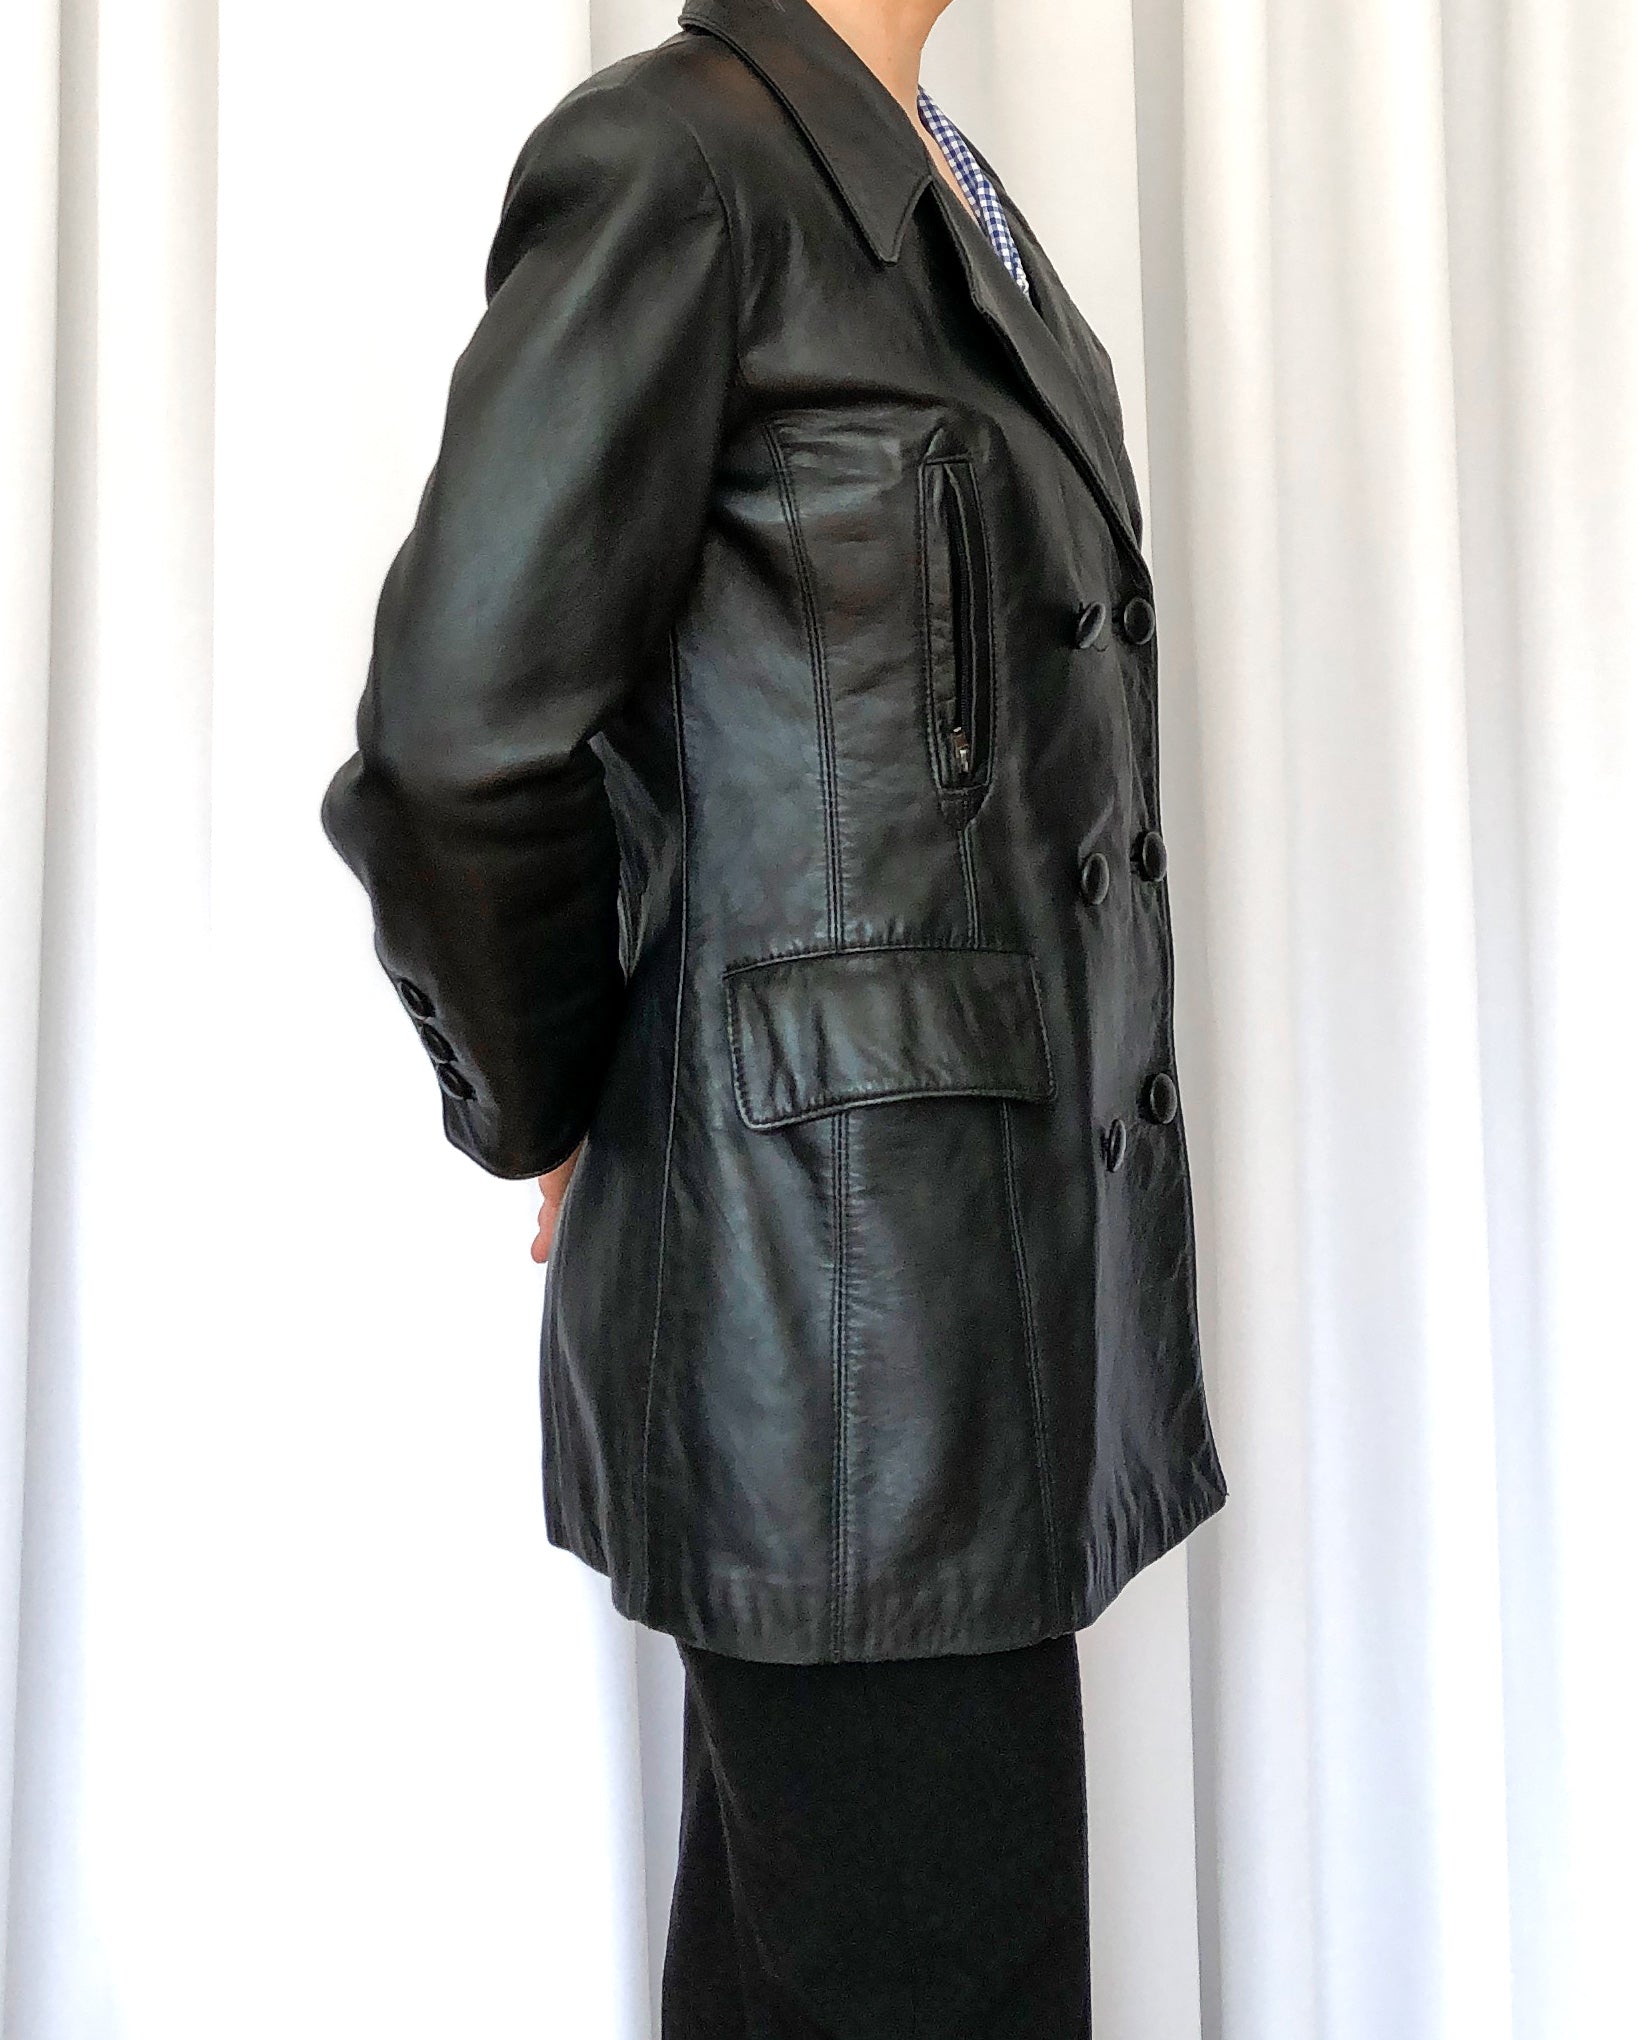 Vintage 70s Black Leather Jacket, Alaska Brand Double Breasted Jacket, Made in Canada